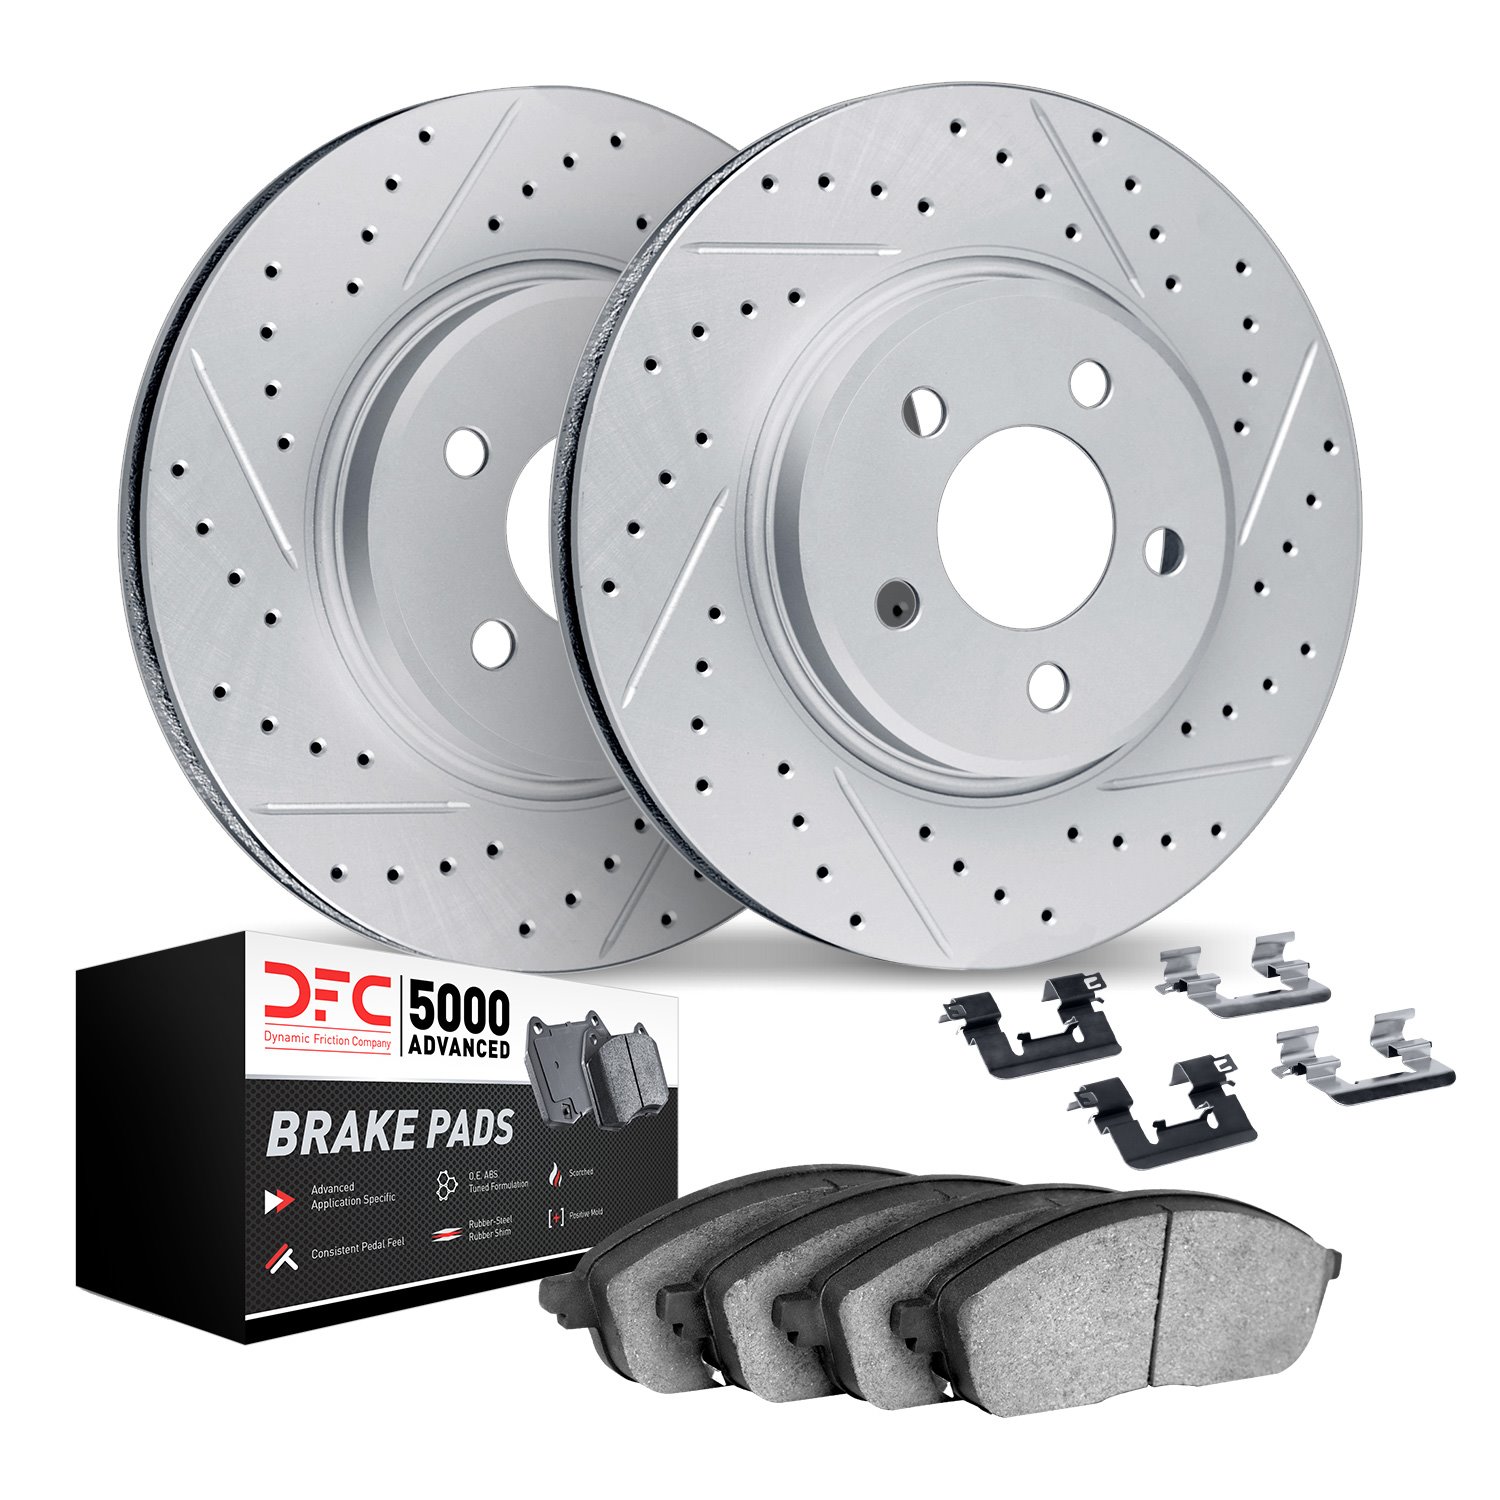 2512-31145 Geoperformance Drilled/Slotted Rotors w/5000 Advanced Brake Pads Kit & Hardware, Fits Select BMW, Position: Rear